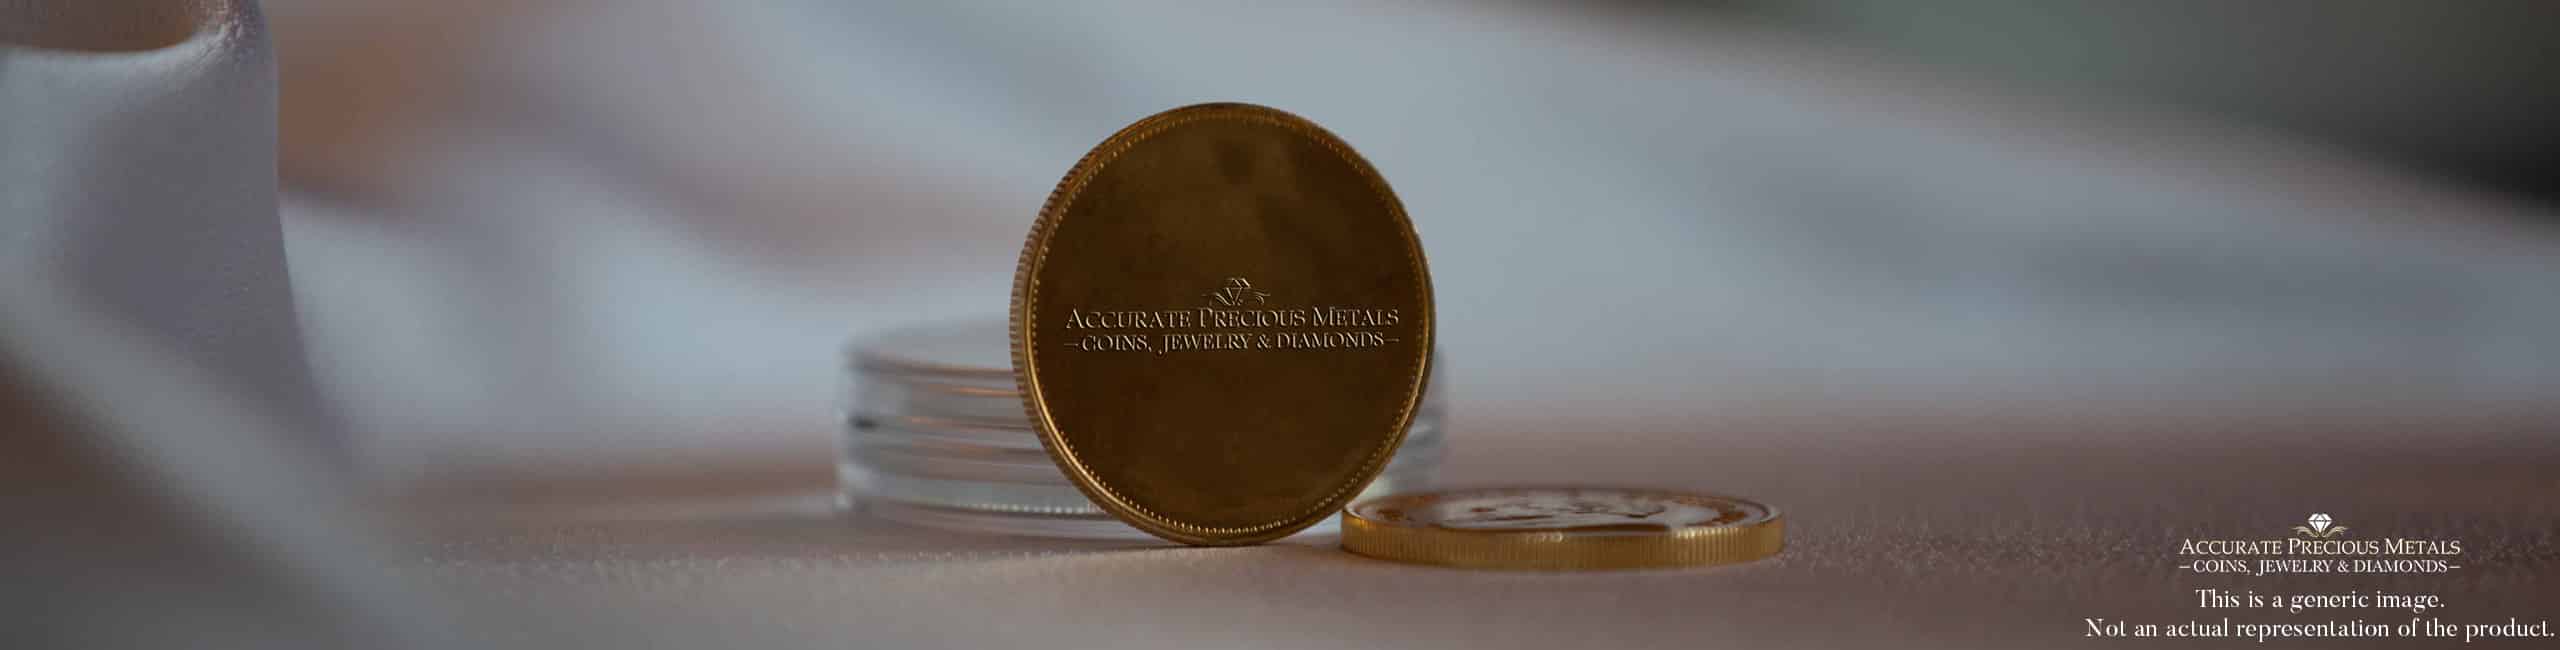 Melodious Austrian Gold Philharmonic 1/4 oz Coin - Symbol of Austrian Musical Excellence